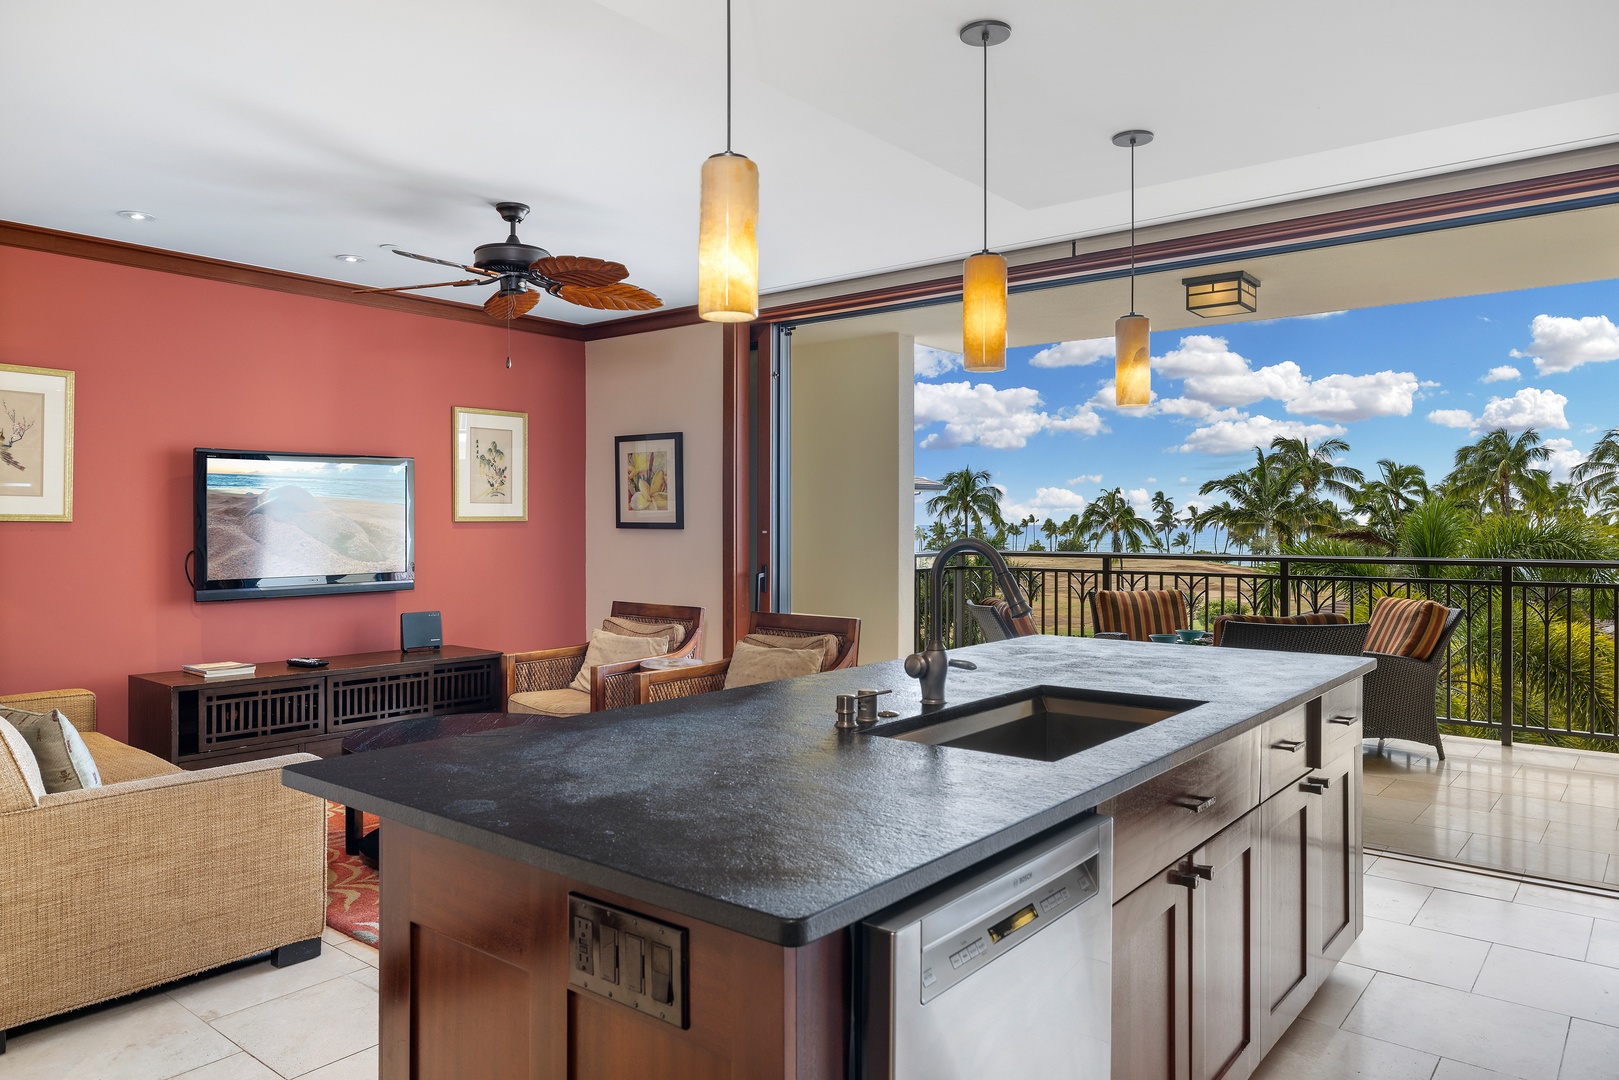 Kapolei Vacation Rentals, Ko Olina Beach Villas O402 - You have ocean views and ocean breezes from the kitchen and living areas.